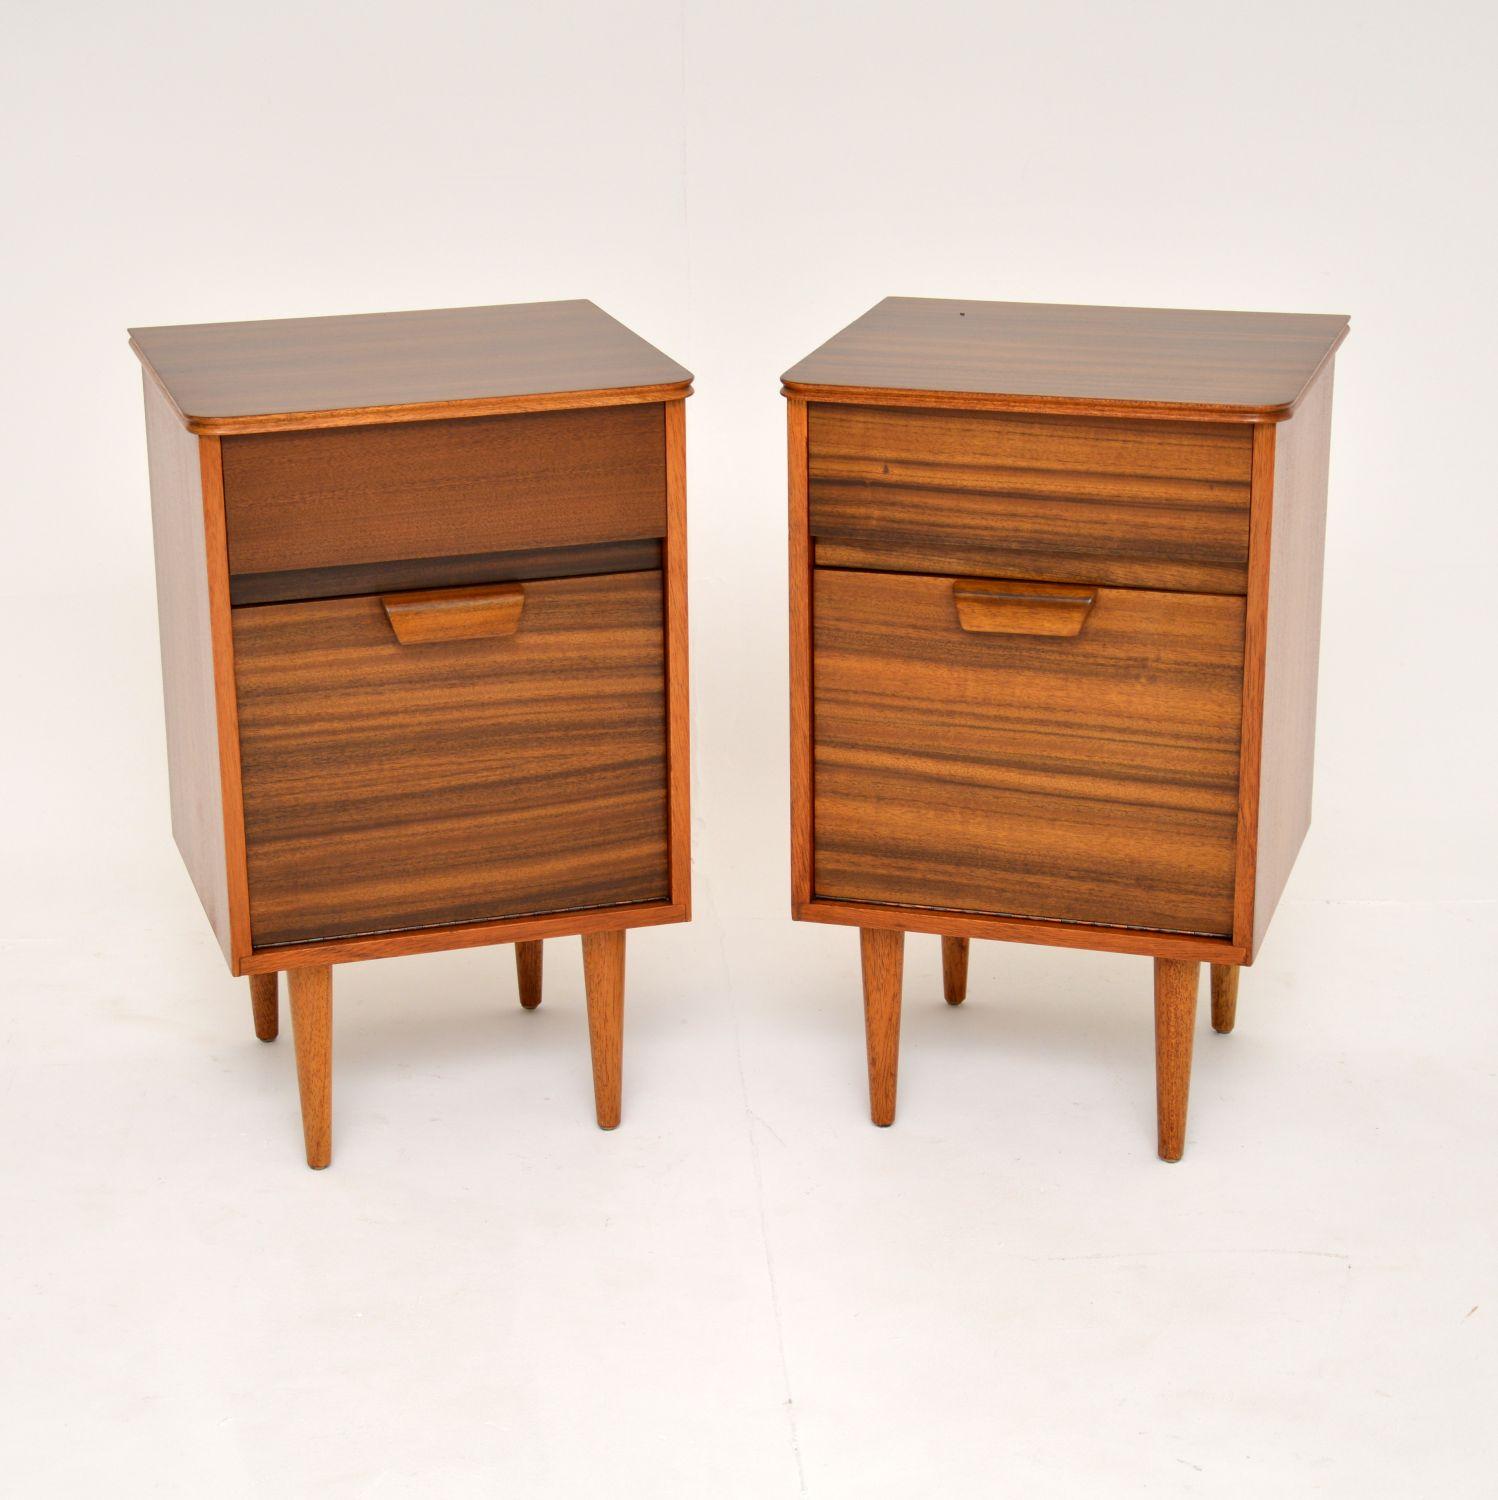 A smart and stylish pair of vintage walnut bedside cabinets. These were made in England by Uniflex and were designed by Gunther Hoffstead. They date from the 1960’s.

The quality is superb, these are beautifully designed and are a very useful